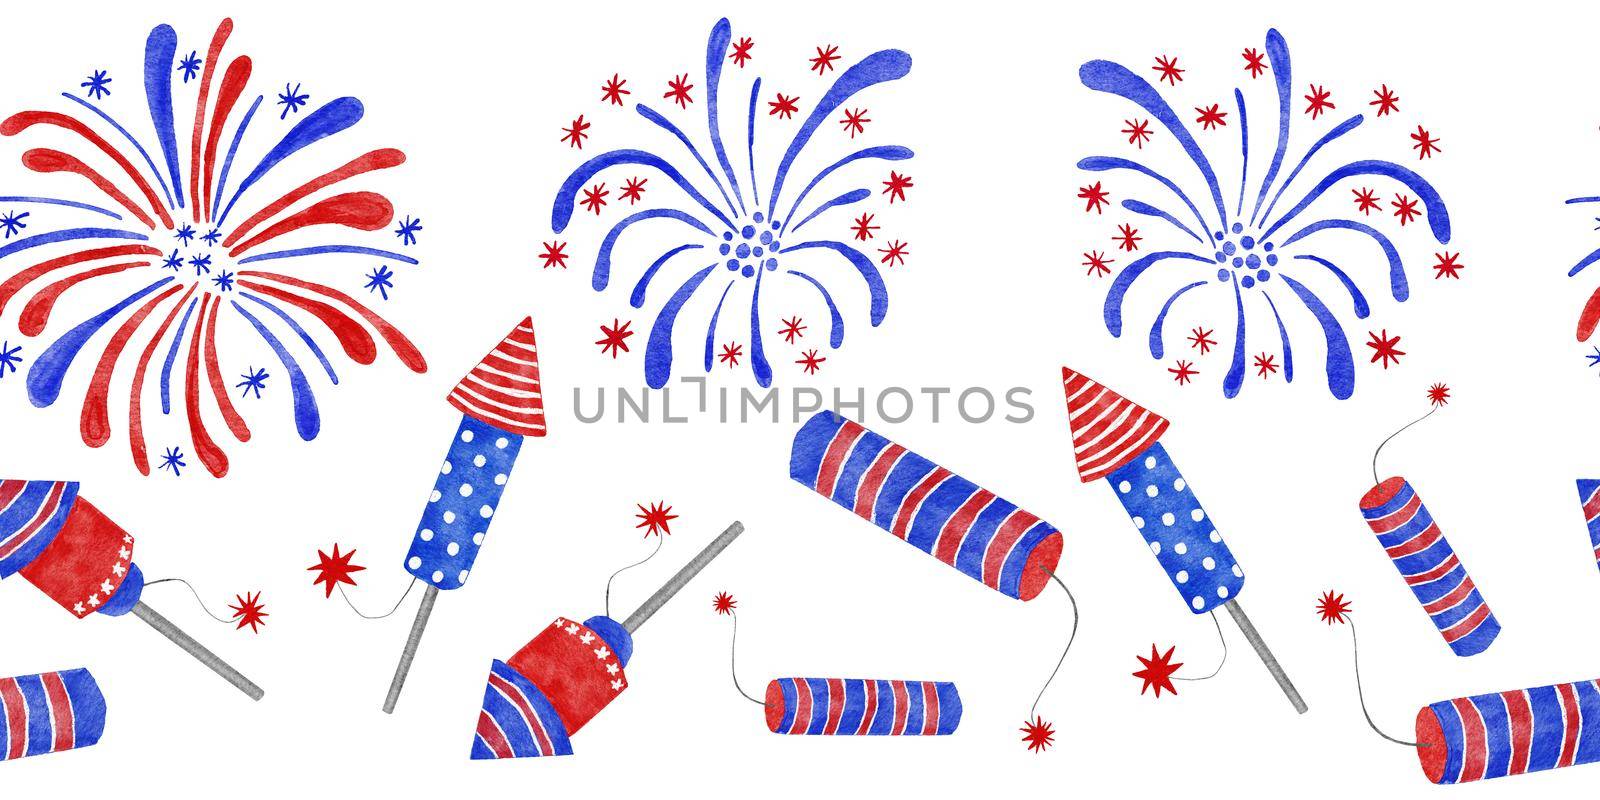 Watercolor seamless hand drawn horizontal border with 4th of July fireworks fire crackers, Fouth of july patriotic American design with party elements in blue red white colors. US celebration print. Salute fabric print funny bright design